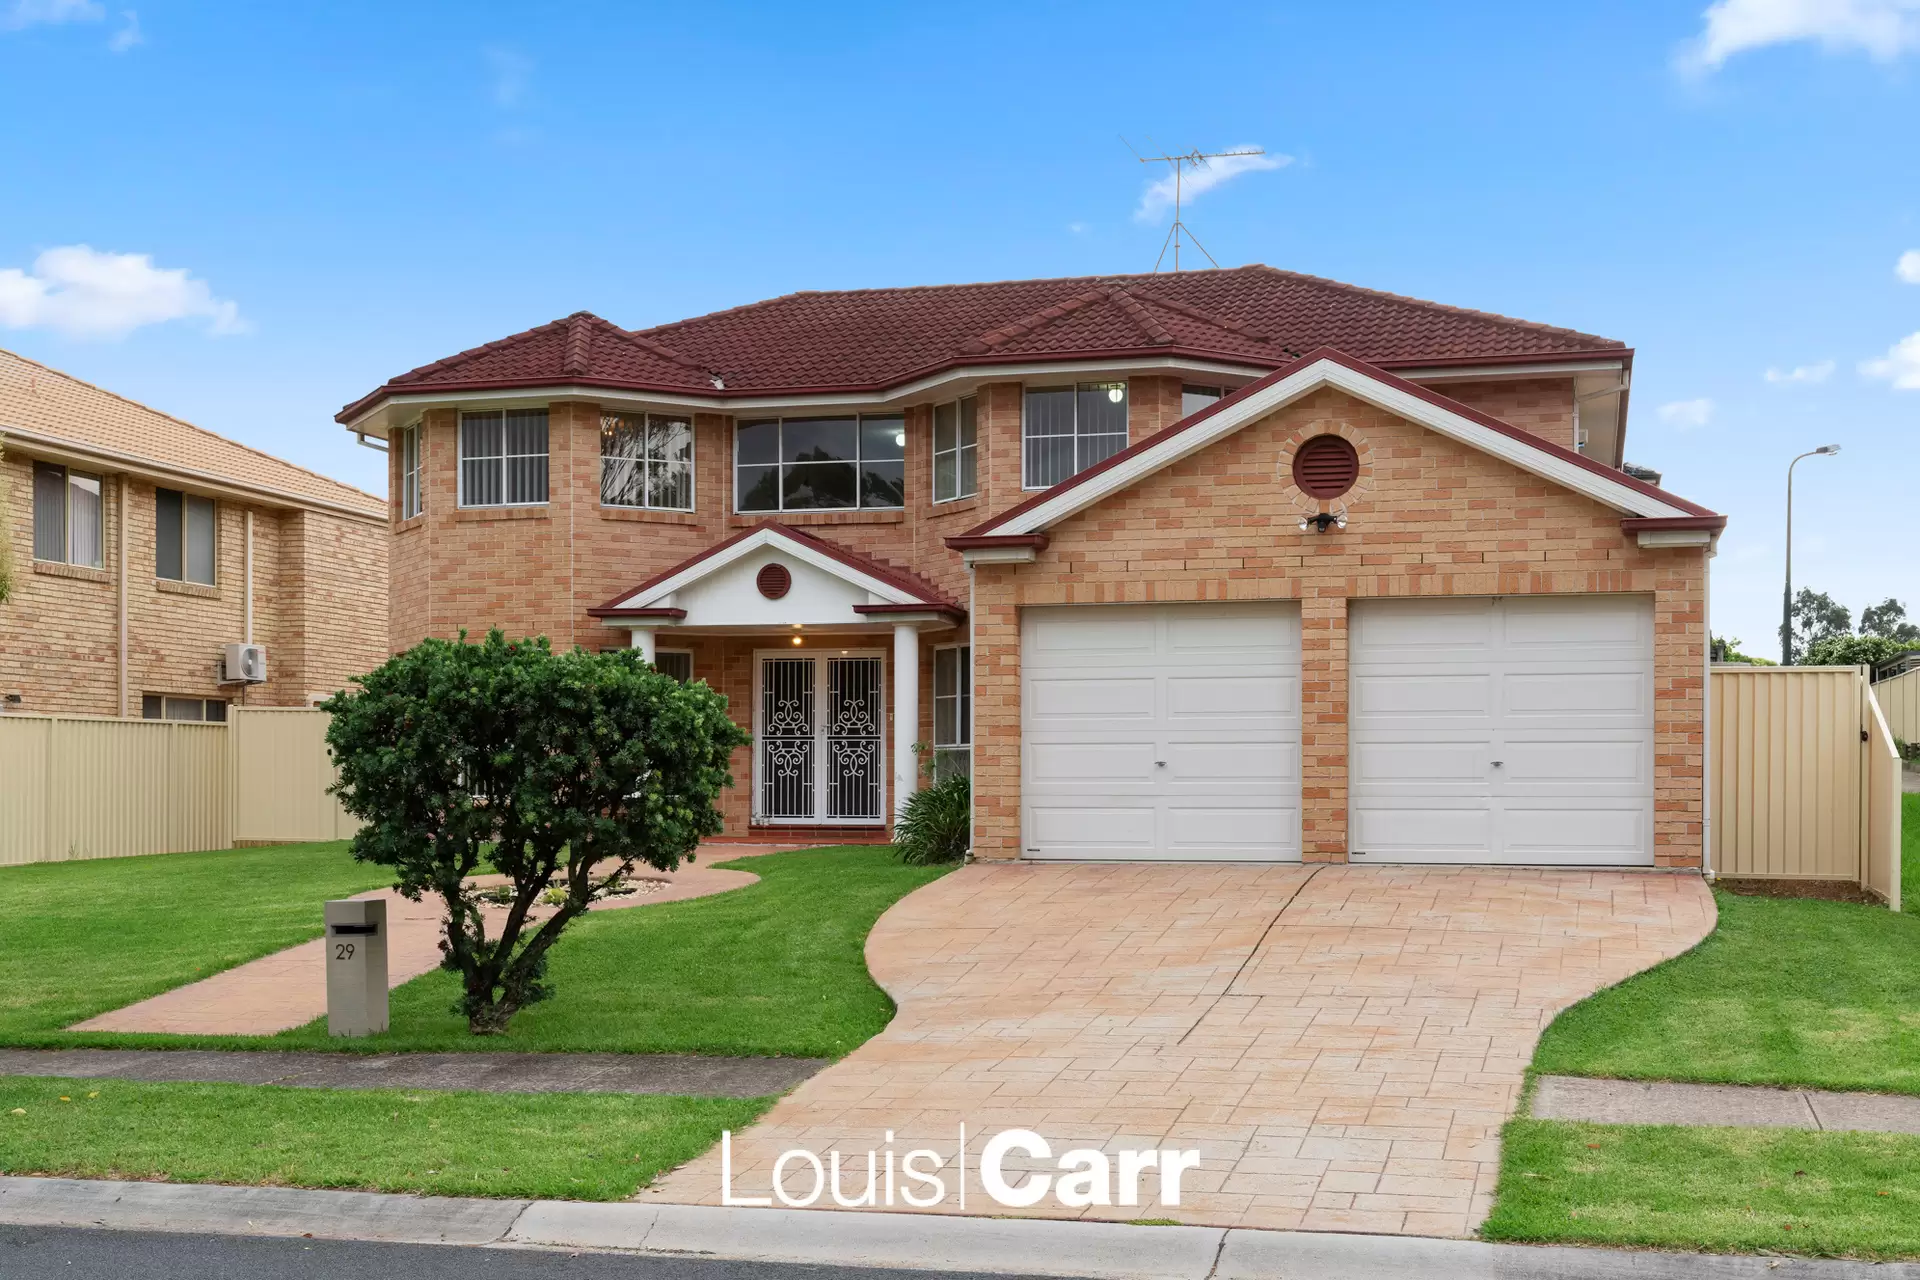 Photo #1: 29 Macquarie Avenue, Kellyville - Leased by Louis Carr Real Estate